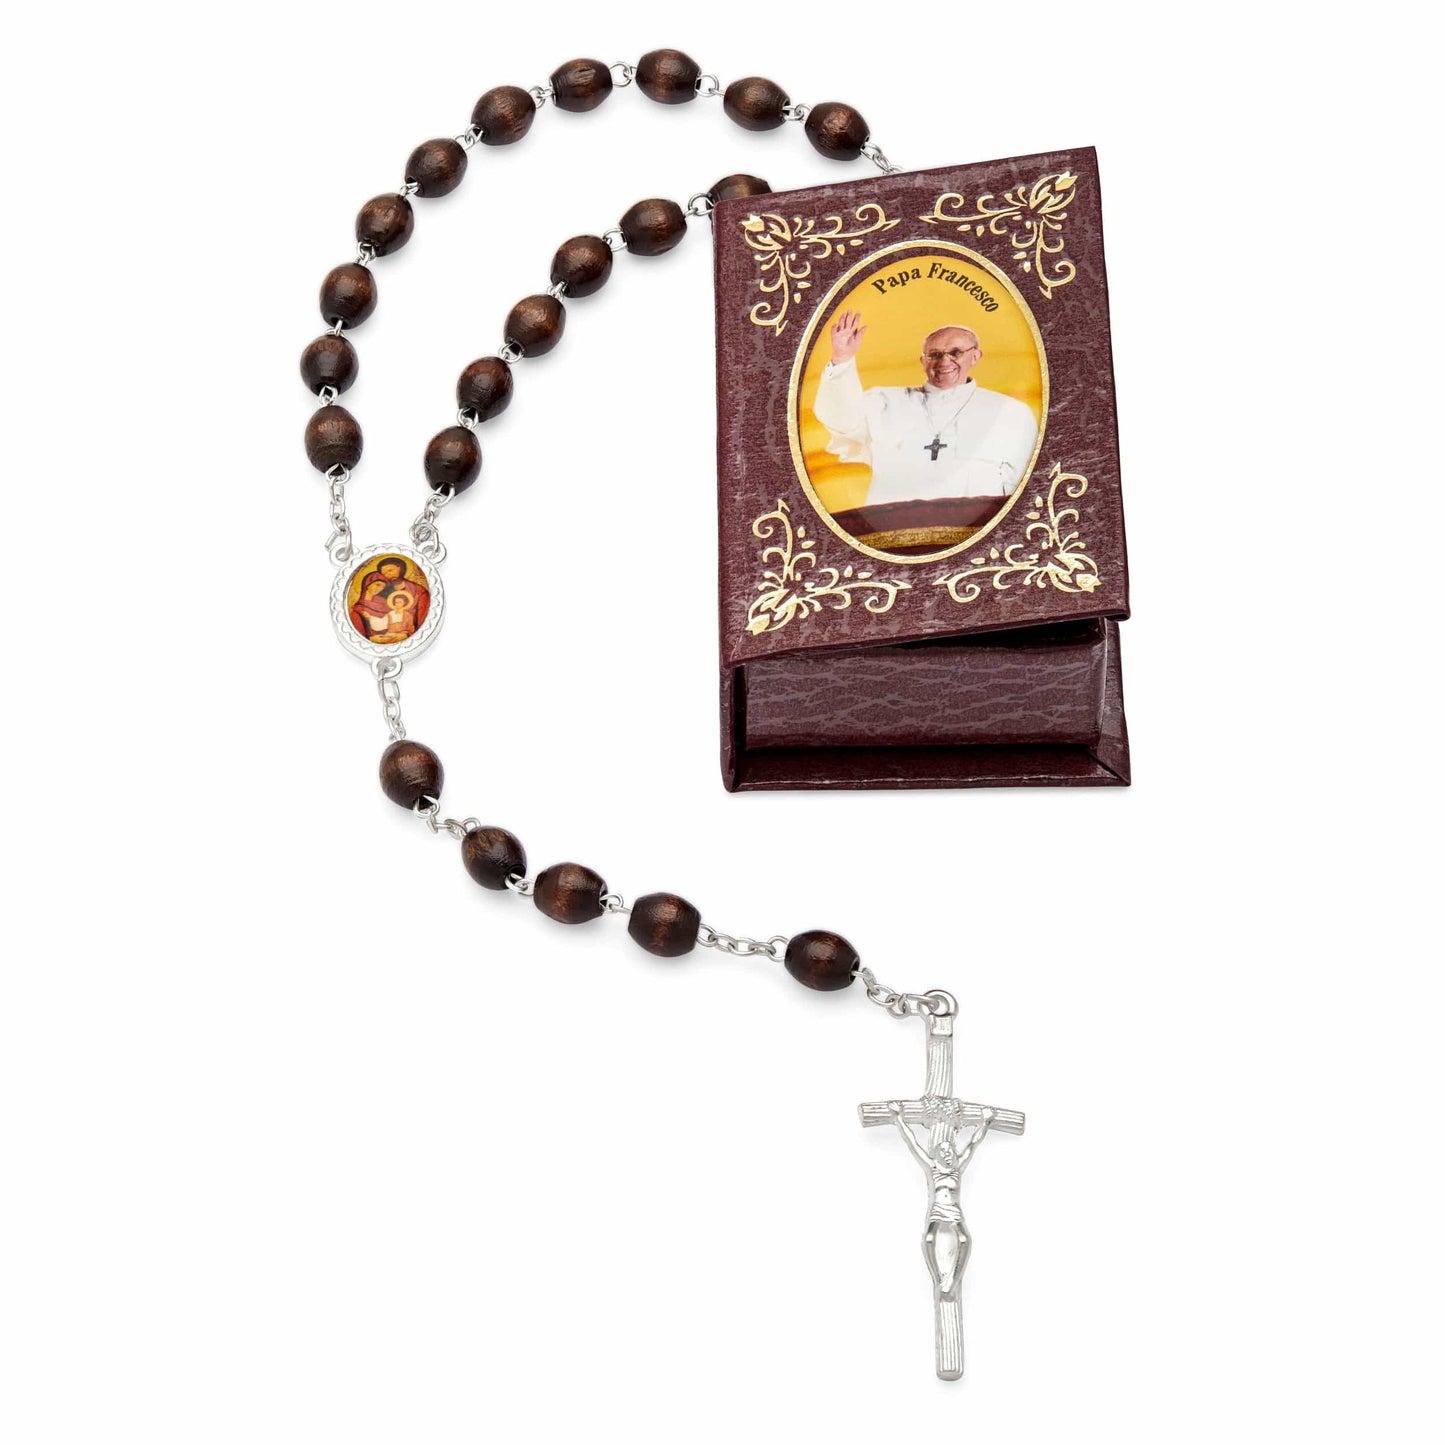 MONDO CATTOLICO Prayer Beads 53 cm (20.90 in) / 7 mm (0.30 in) Pope Francis Brown Case and Rosary